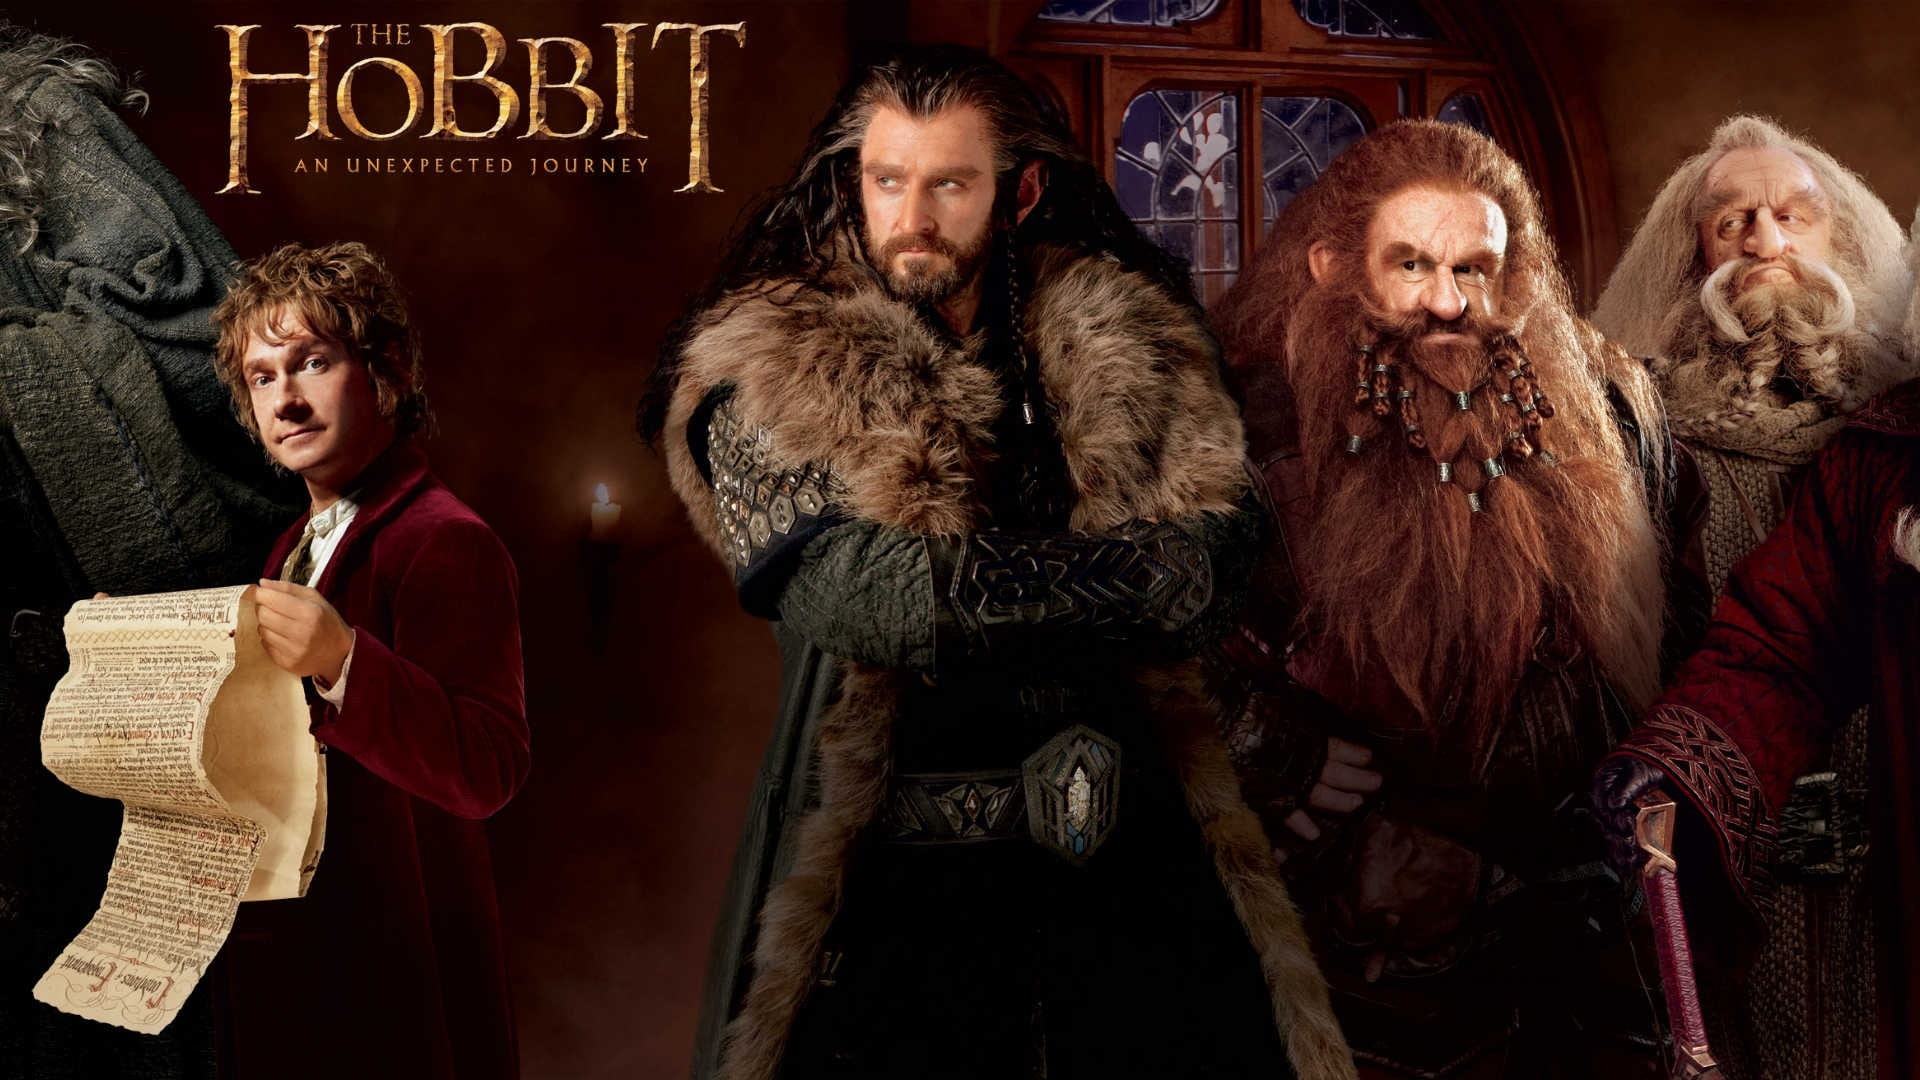 The Hobbit: An Unexpected Journey, movies, Bilbo Baggins, Thorin Oakenshield